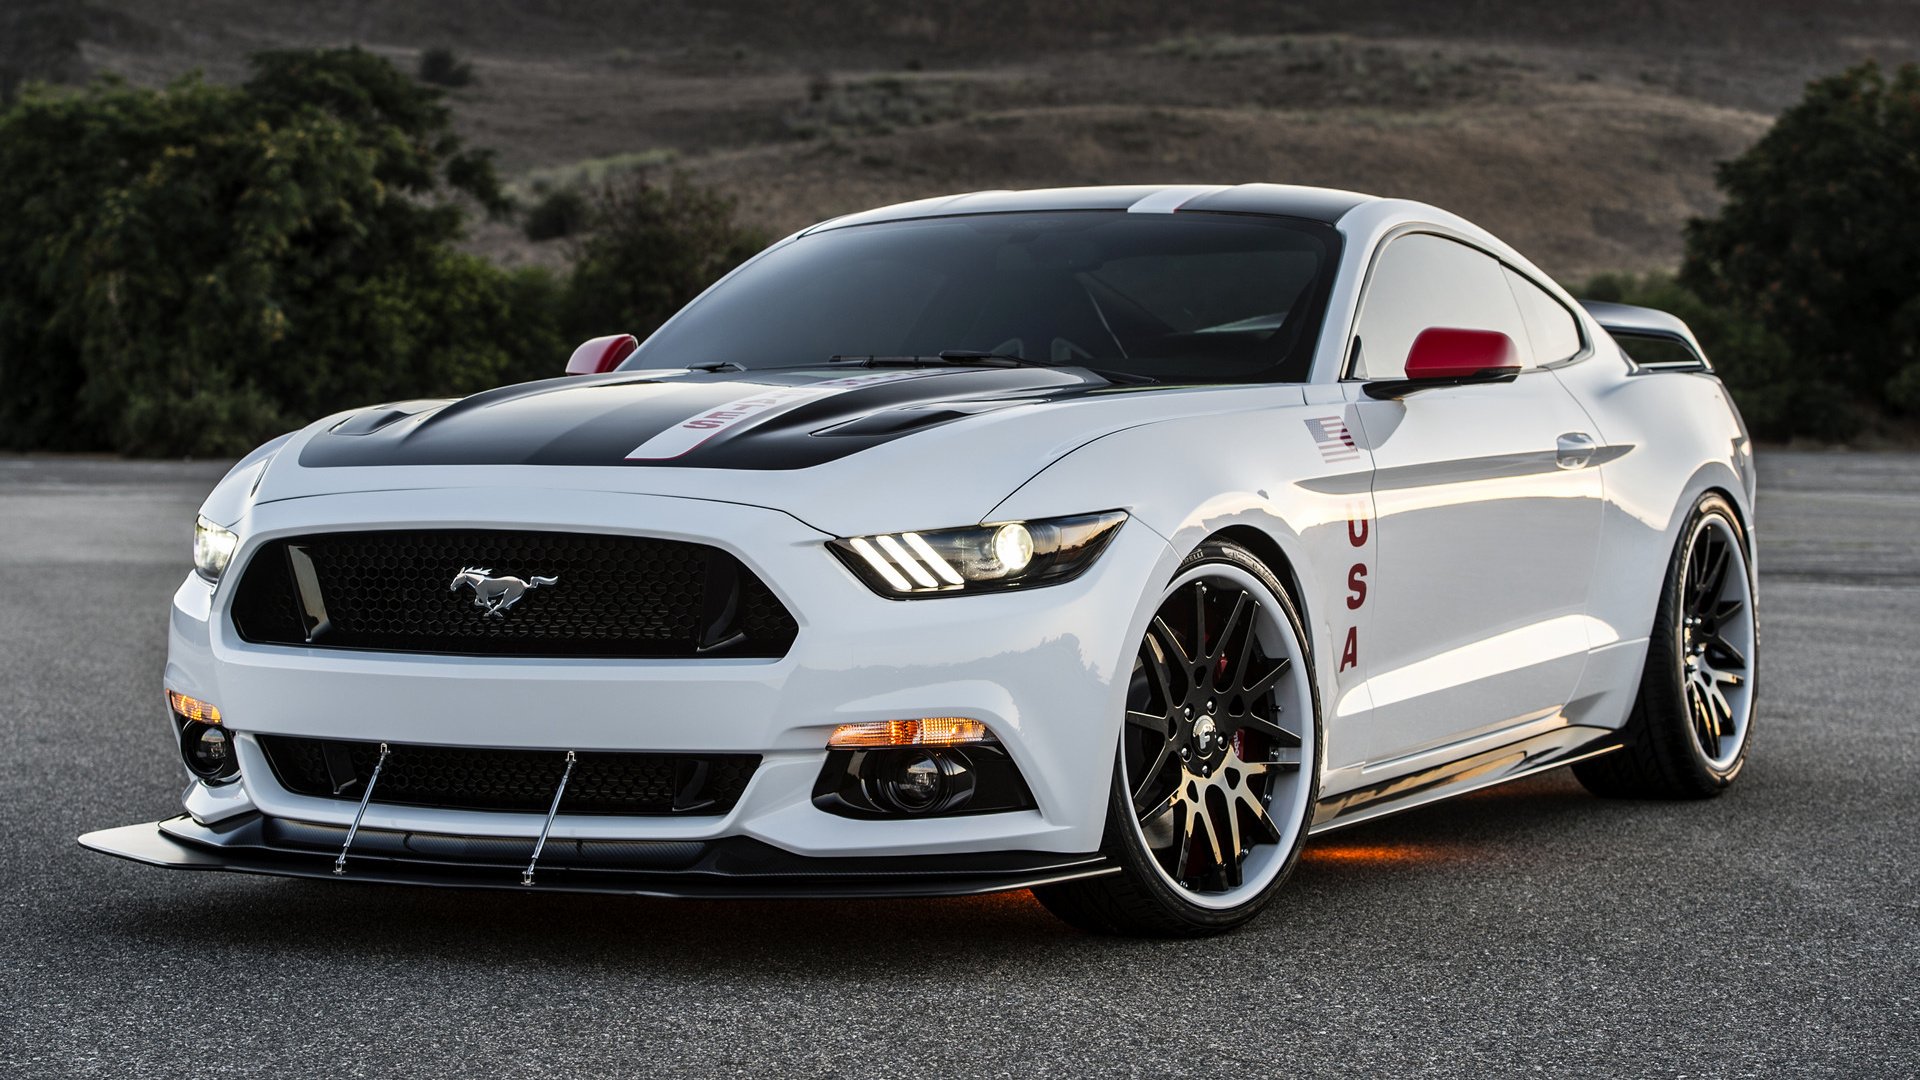 2015 Ford Mustang Apollo Edition Hd Wallpaper Background Image 1920x1080